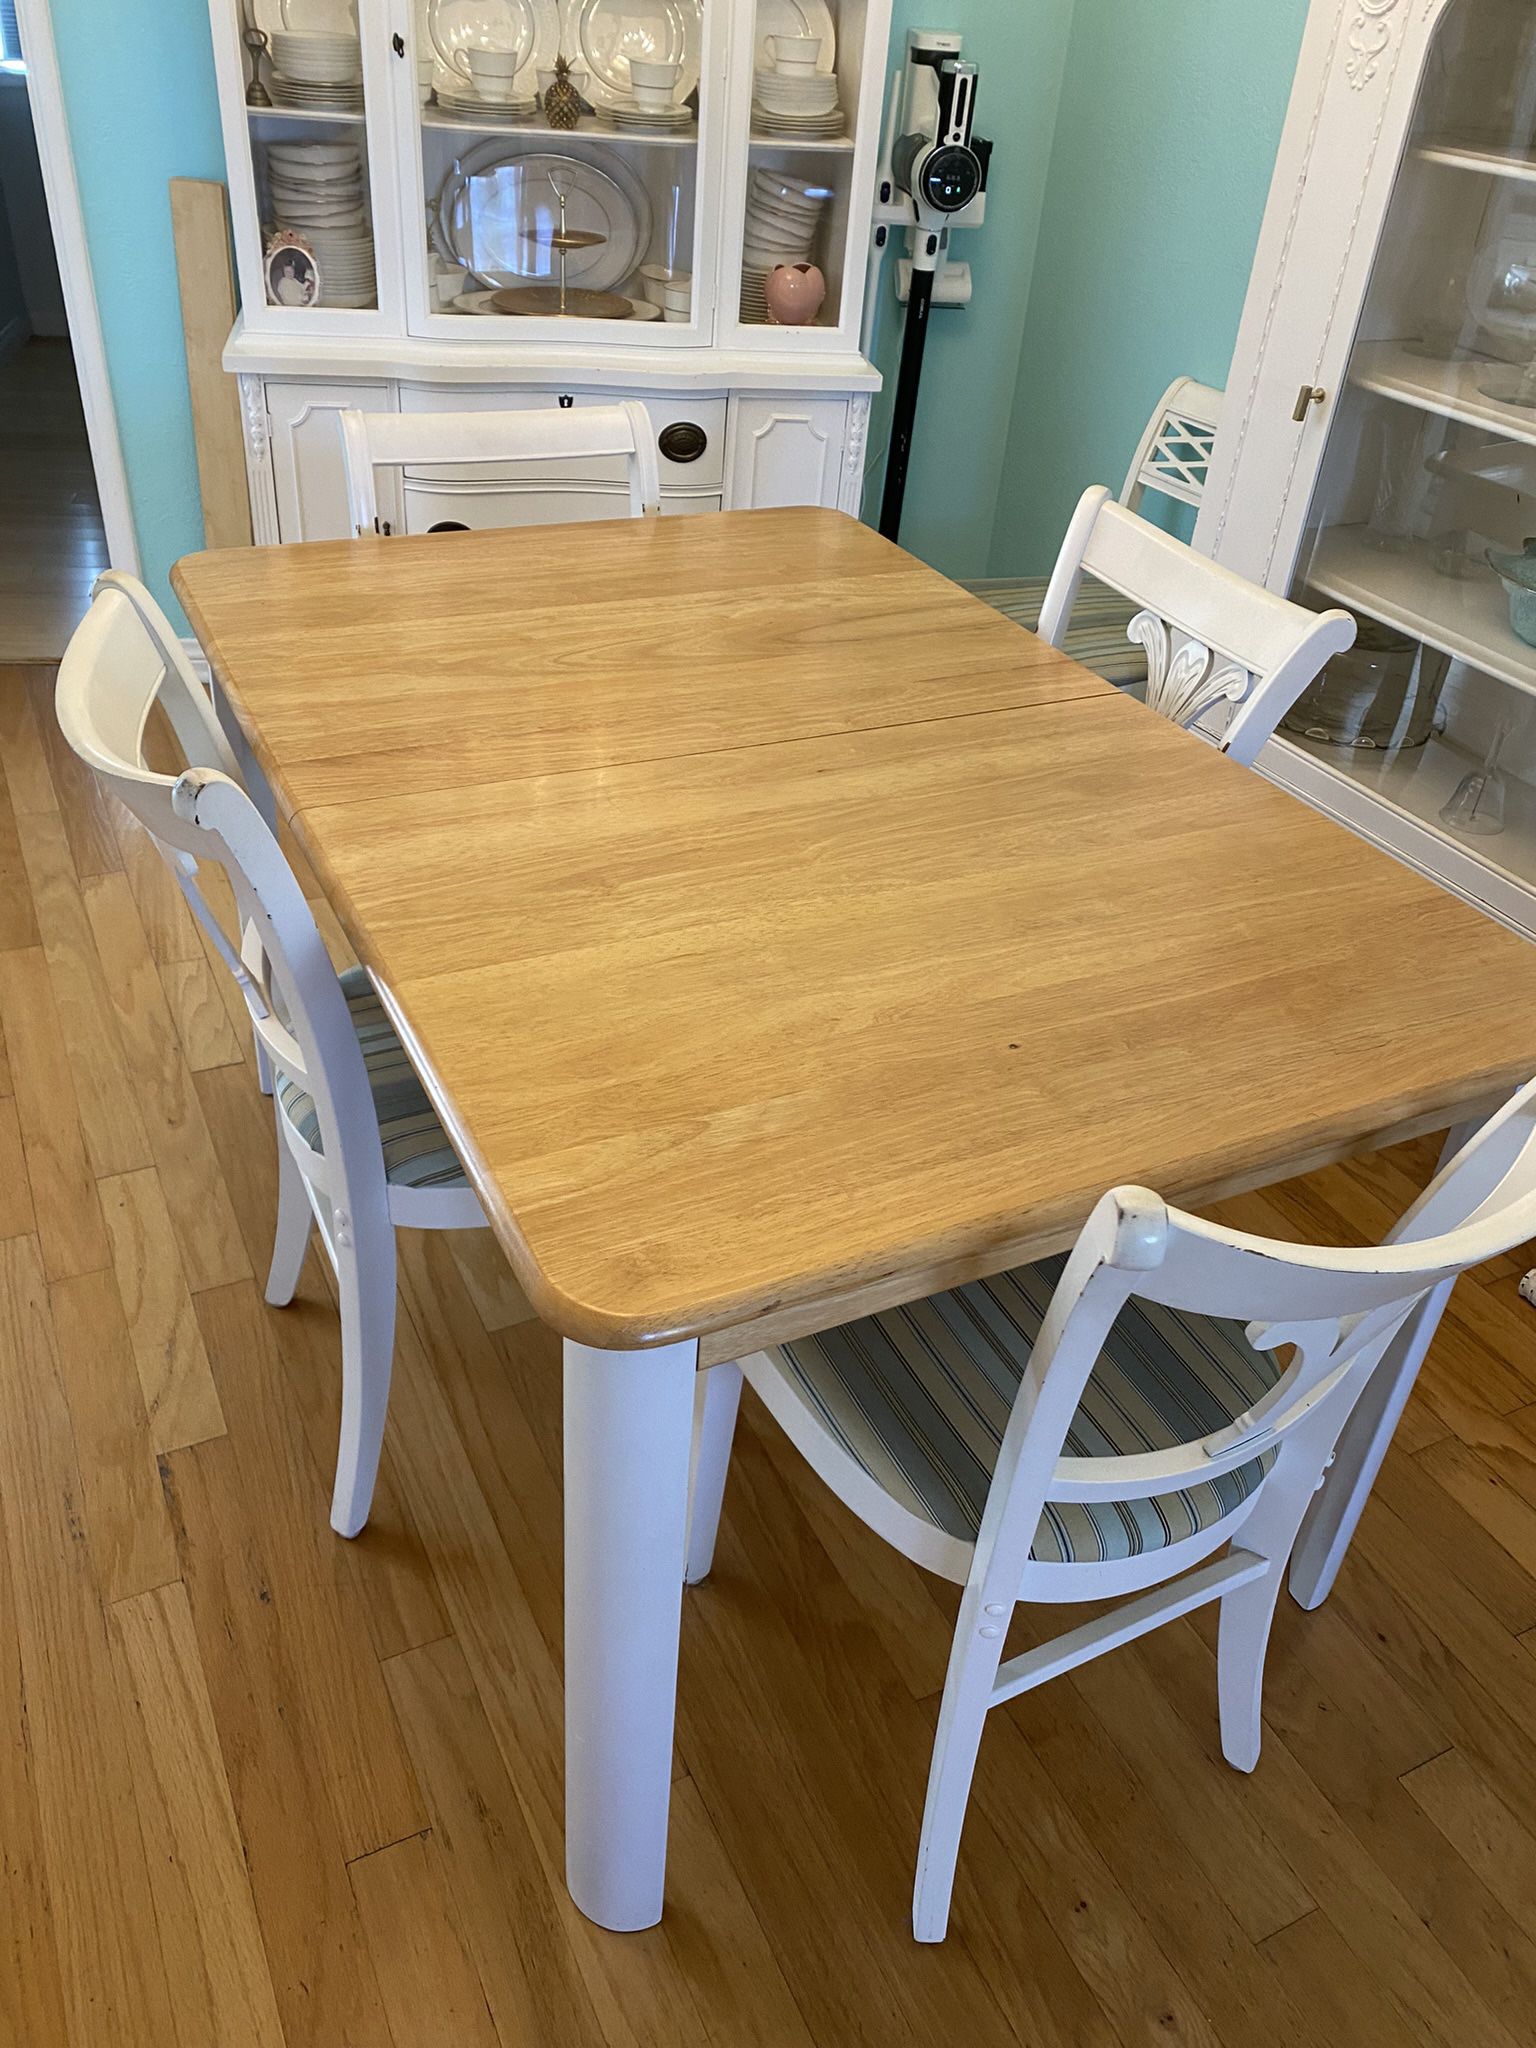 Kitchen Table With Vintage Chairs